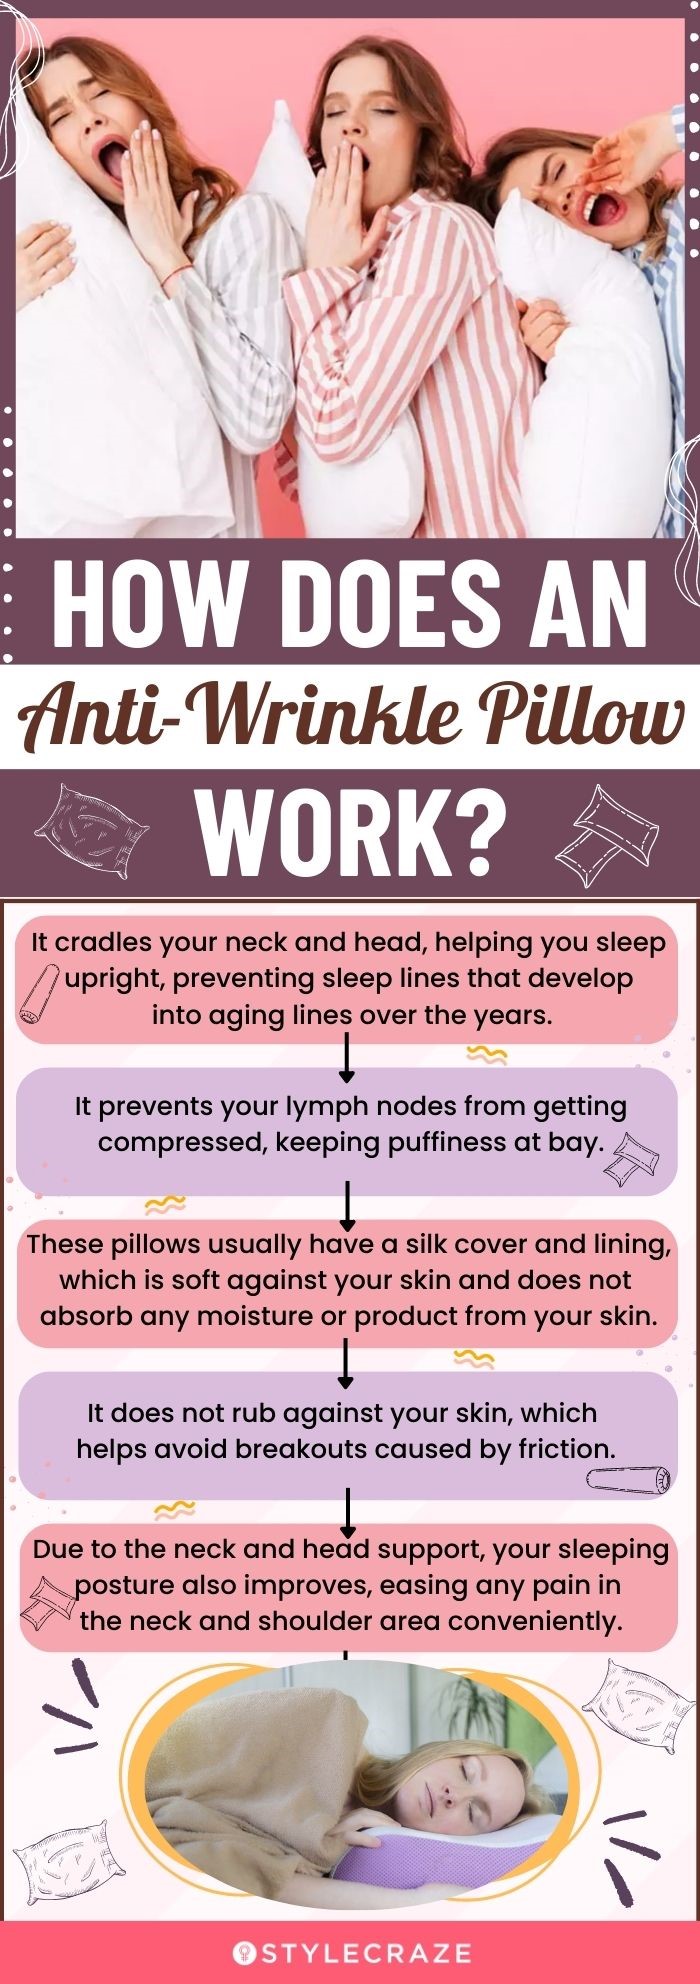 How Does An Anti-Wrinkle Pillow Work (infographic)